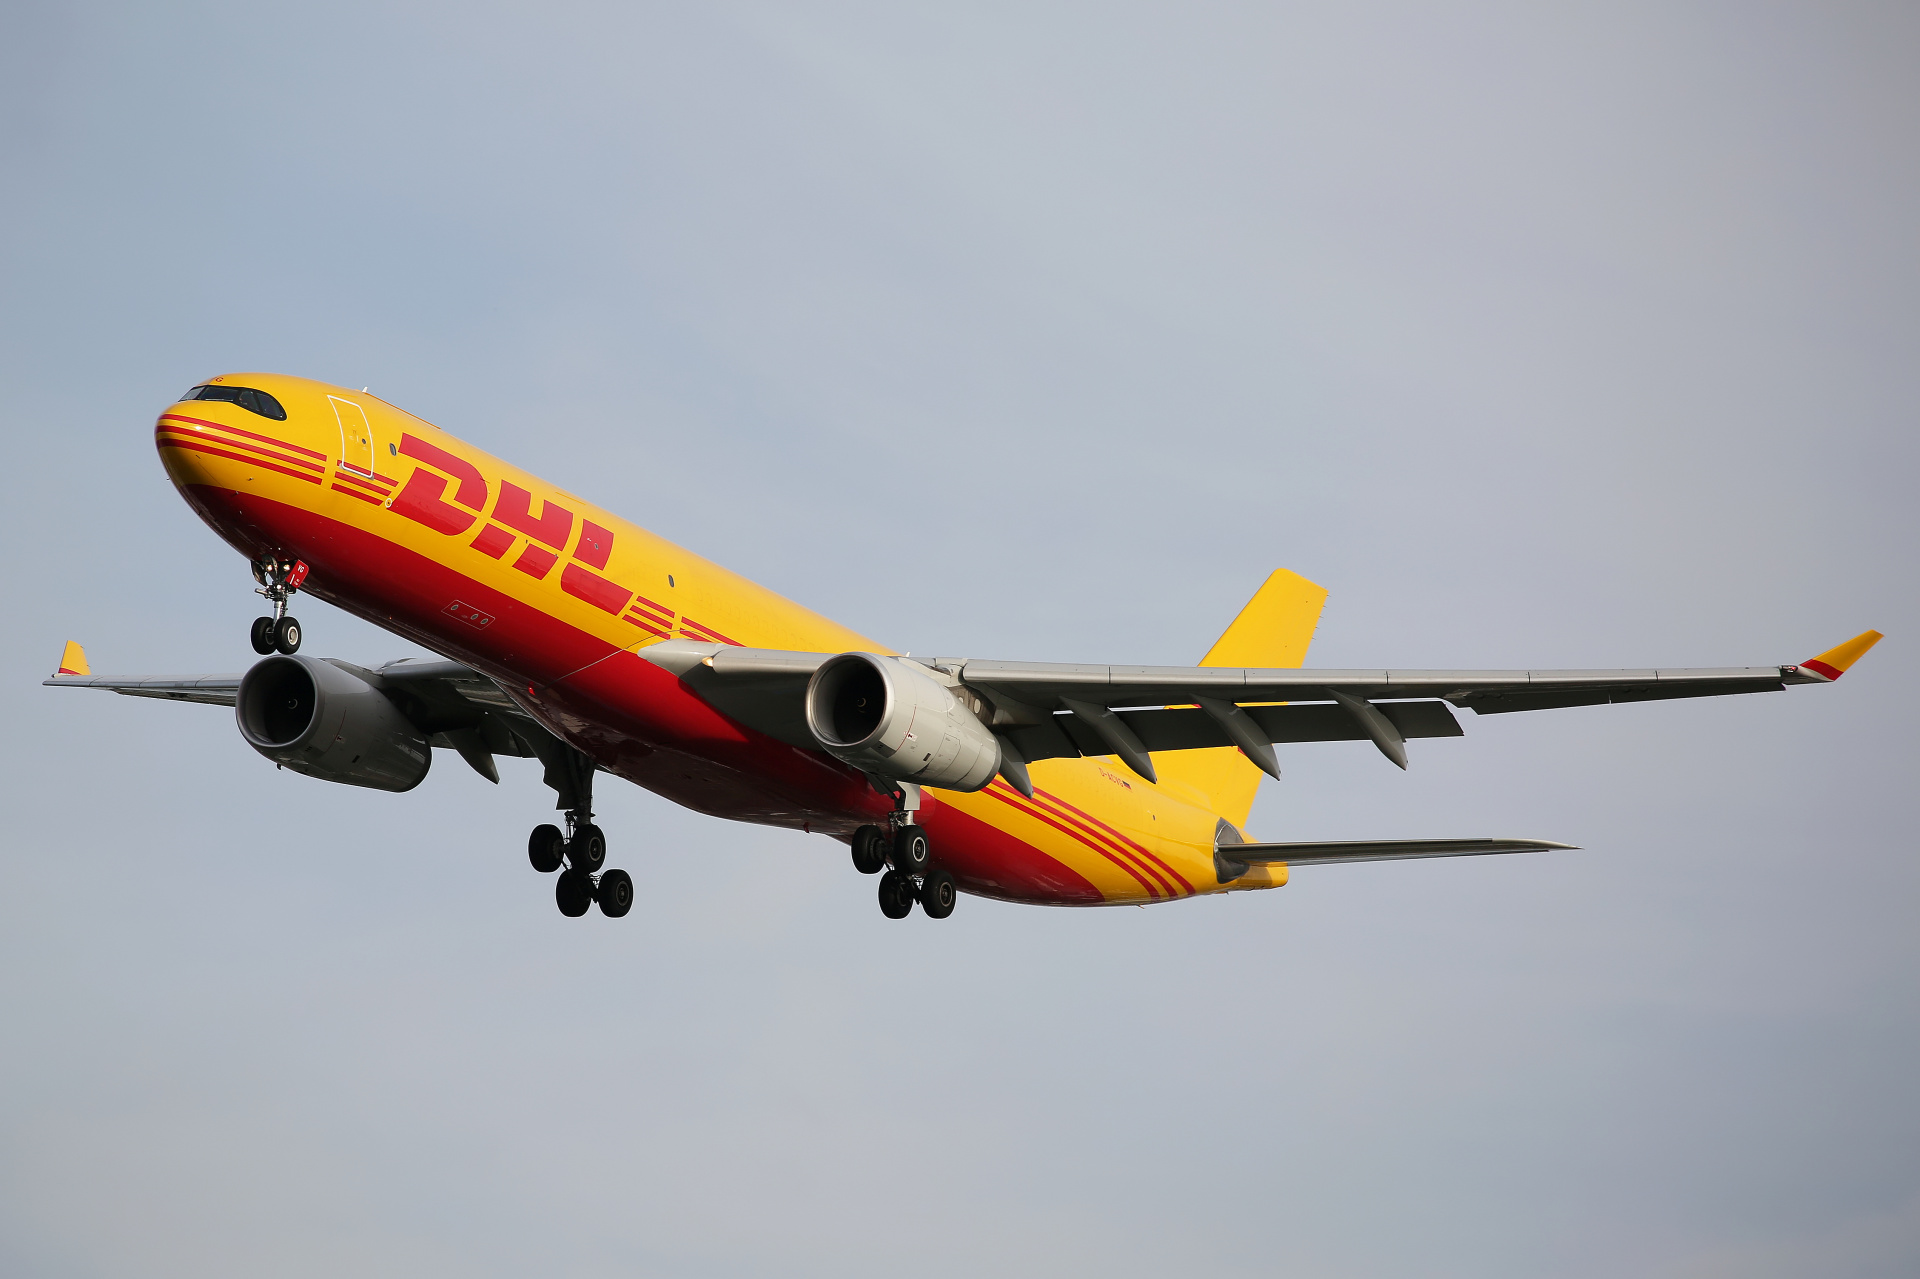 D-ACVG, DHL (EAT Leipzig) (Aircraft » Schiphol Spotting » Airbus A330-300P2F)